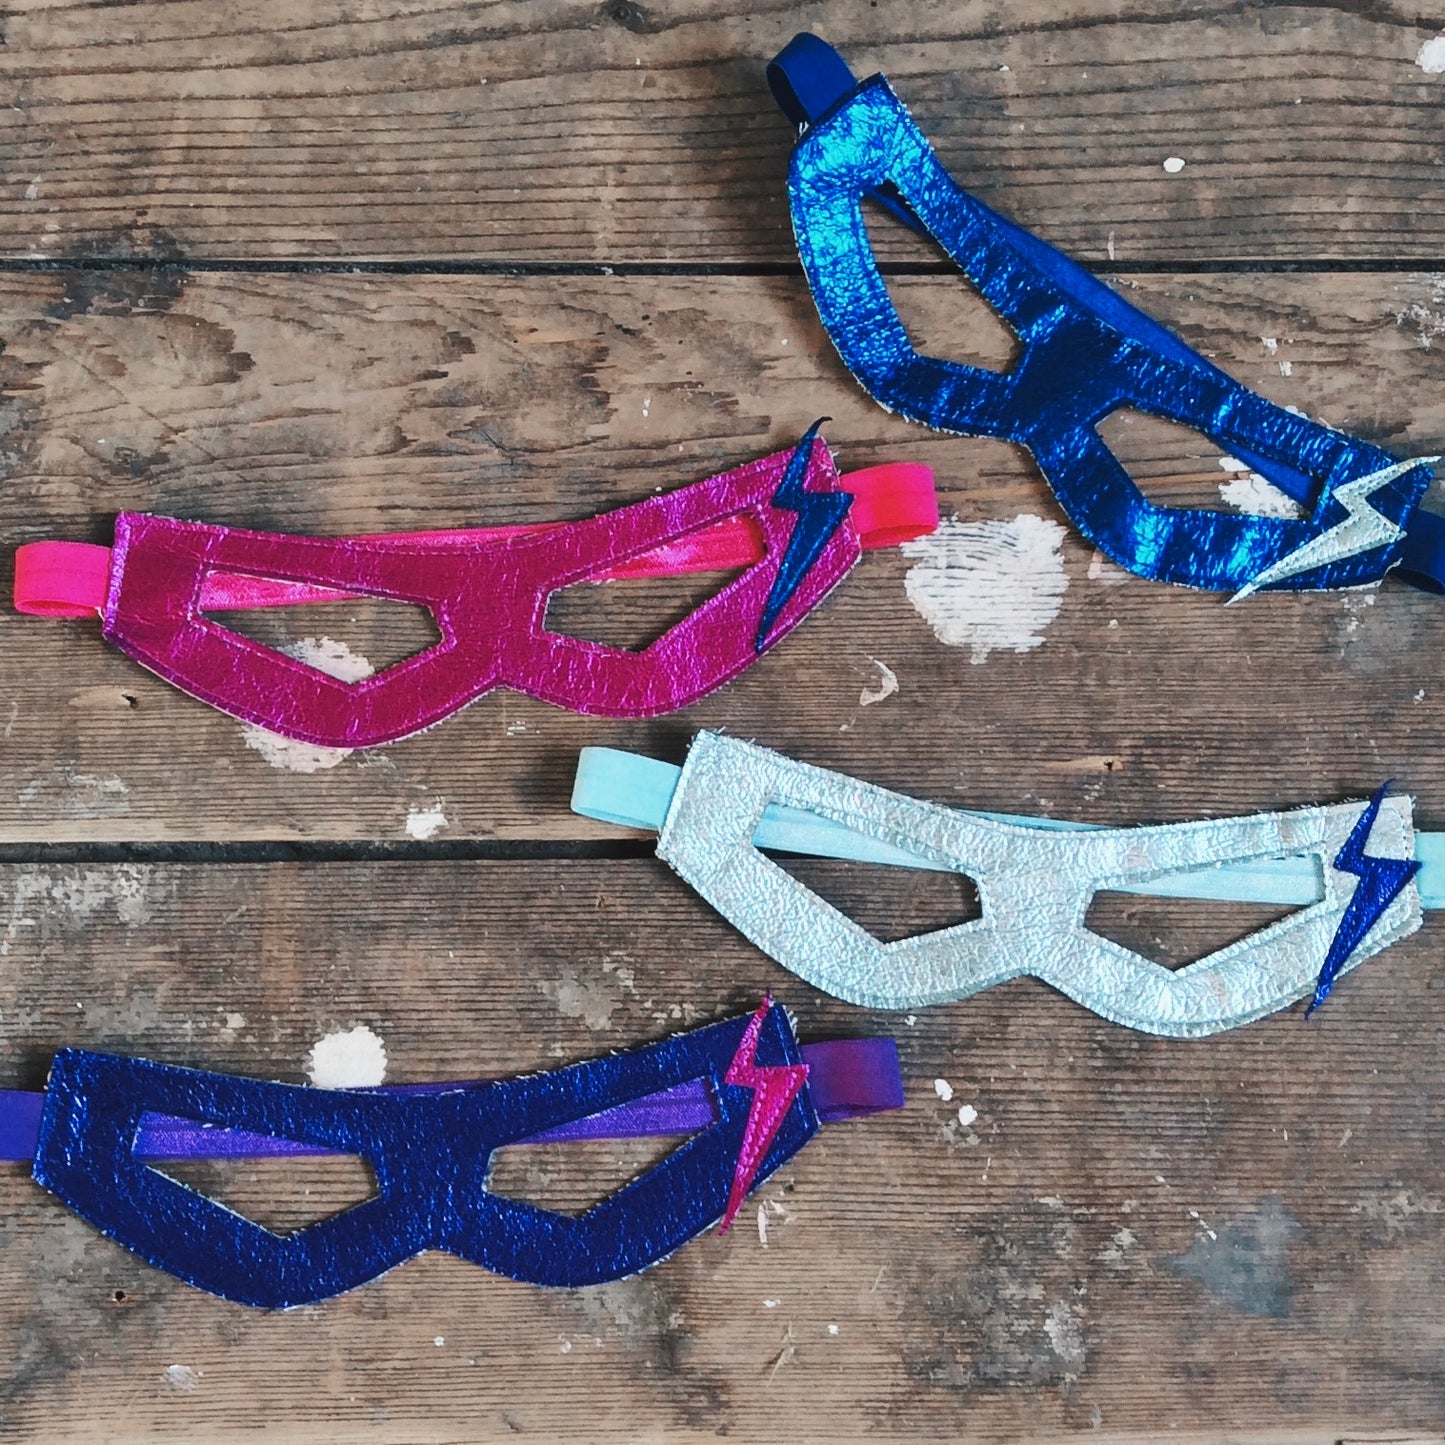 Colour variations of Metallic leather Lightning superhero mask by For Just ONE Day